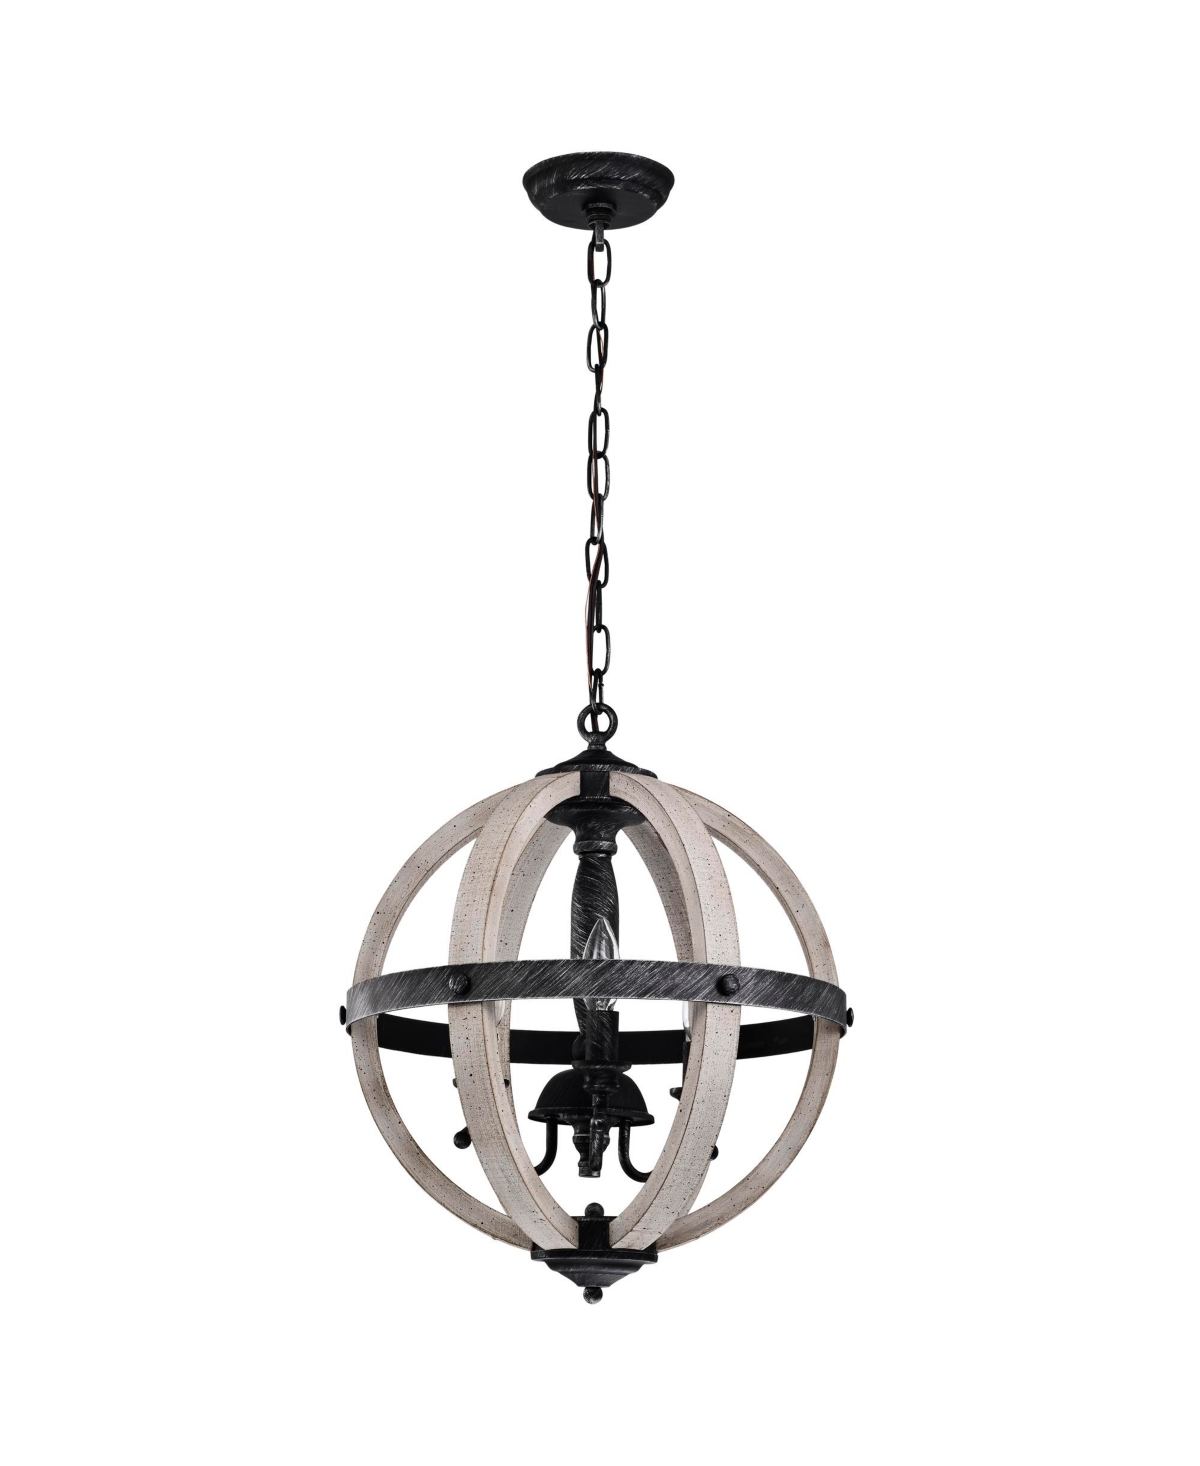 Home Accessories Davi 16" Indoor Finish Chandelier With Light Kit In Weathered Black And Weathered White